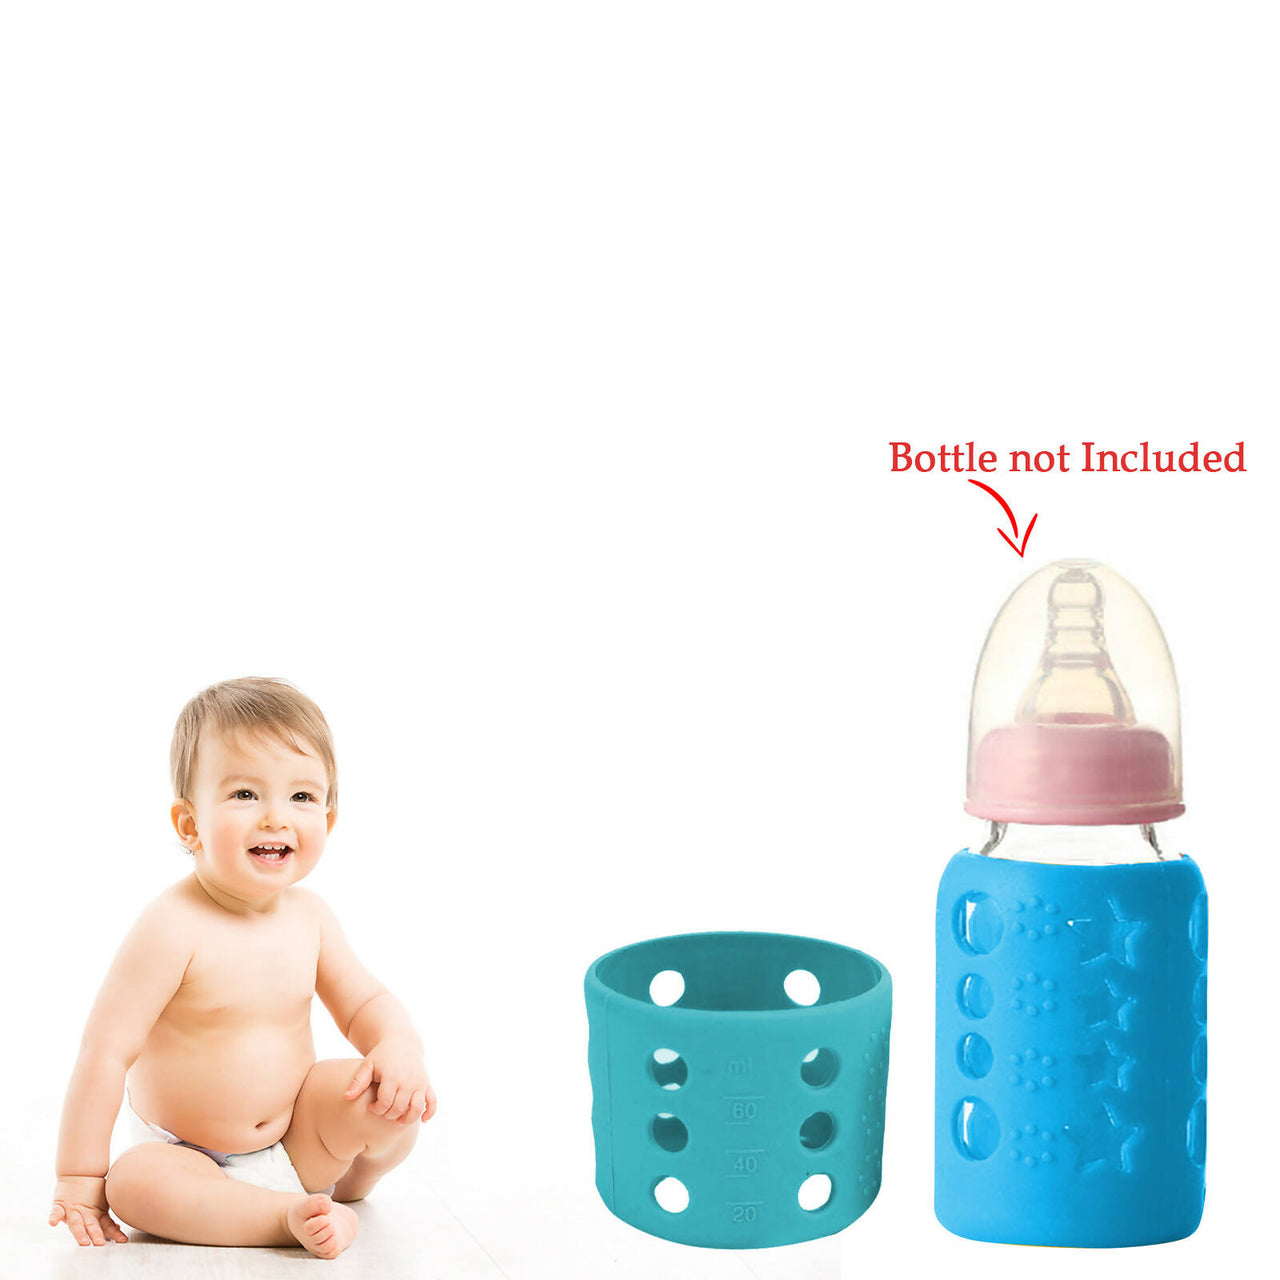 Safe-O-Kid Silicone Baby Feeding Bottle Cover Cum Sleeve for Insulated Protection Small 60mL- Blue - Distacart